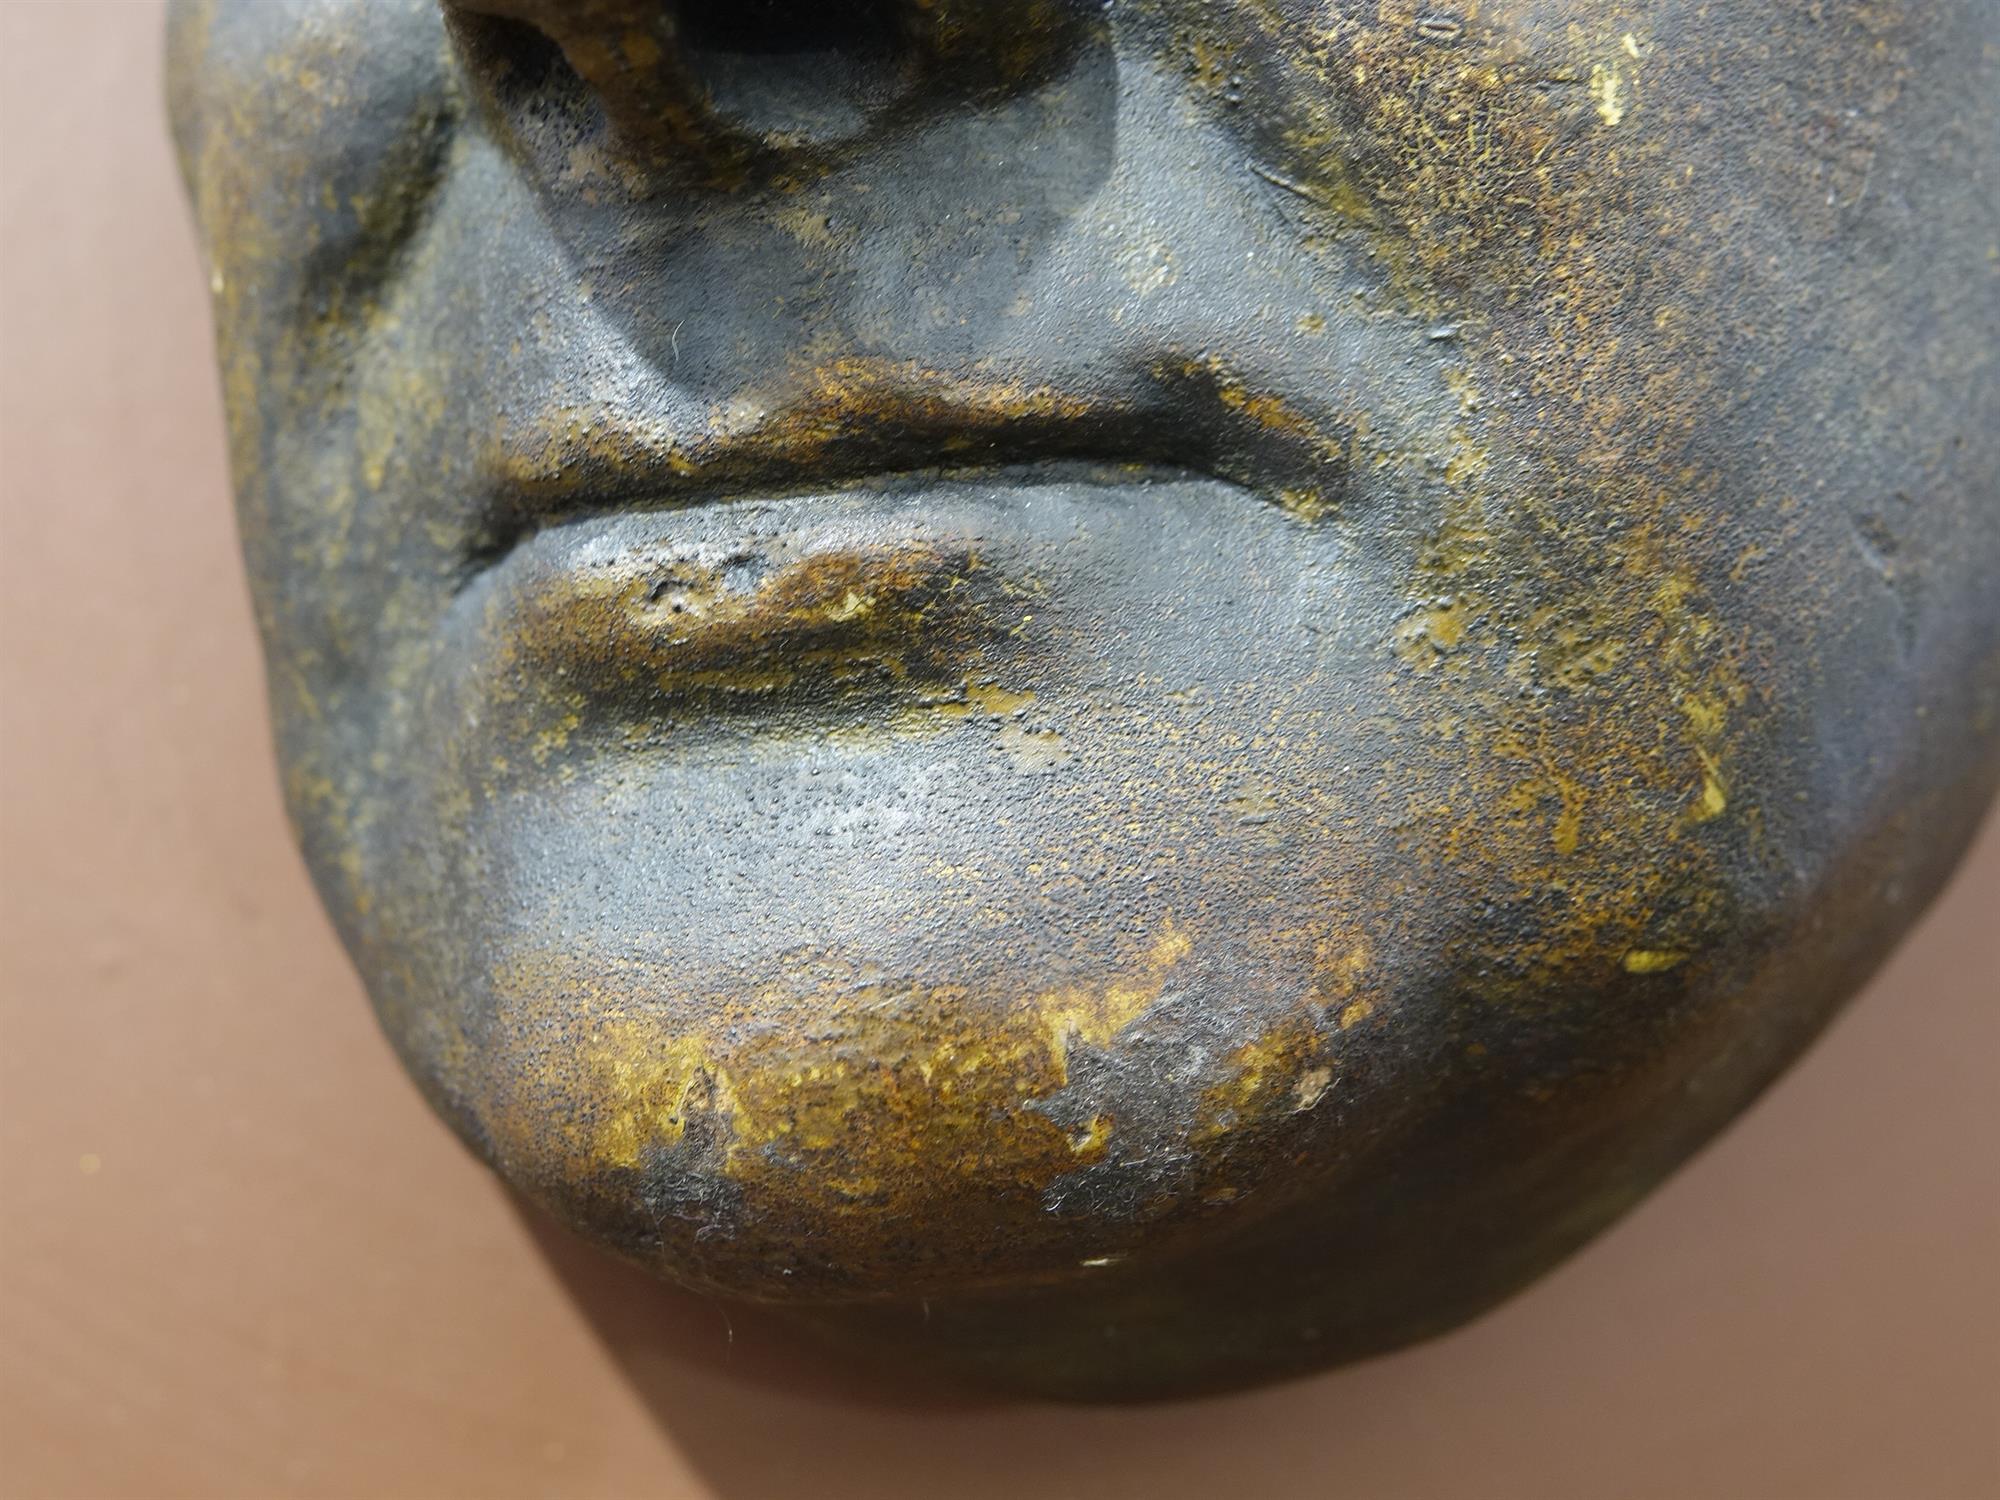 ***Please note: this is ceramic with a 'bronzed' finish rather than bronze*** A BRONZED DEATH MASK - Image 10 of 12